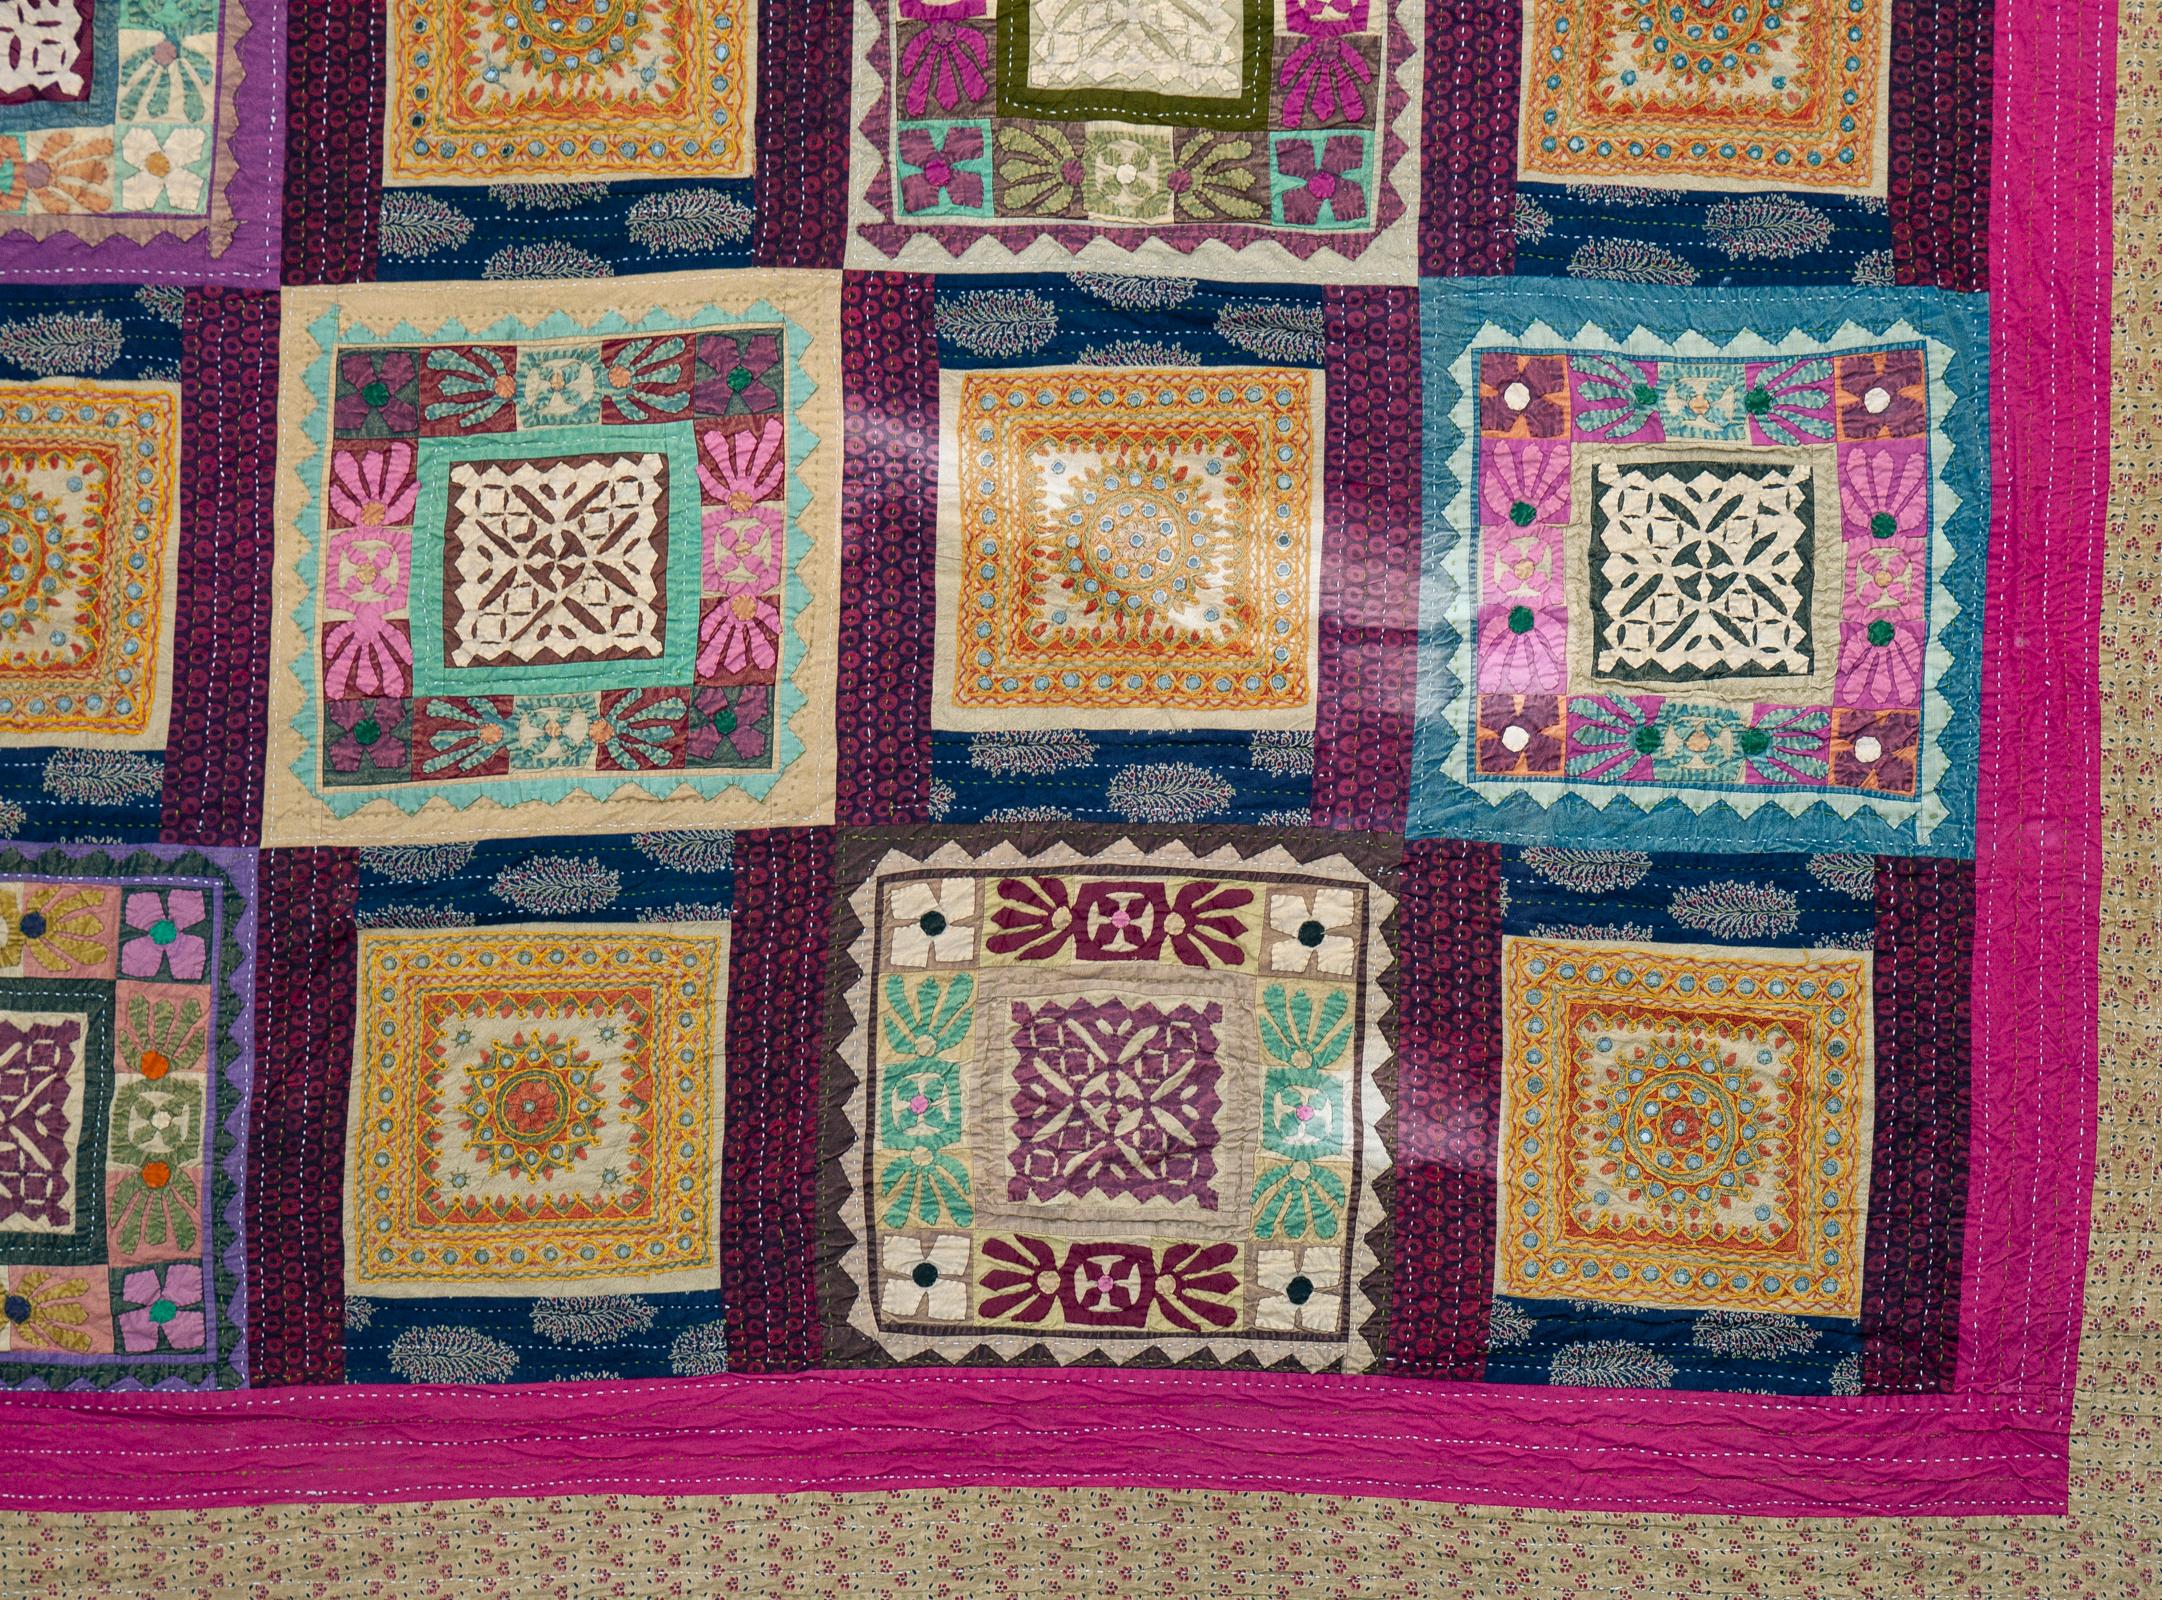 Colorful patchwork textile with 20 intricate squares, handmade from India.
Use as wall hanging, bedspread or throw.